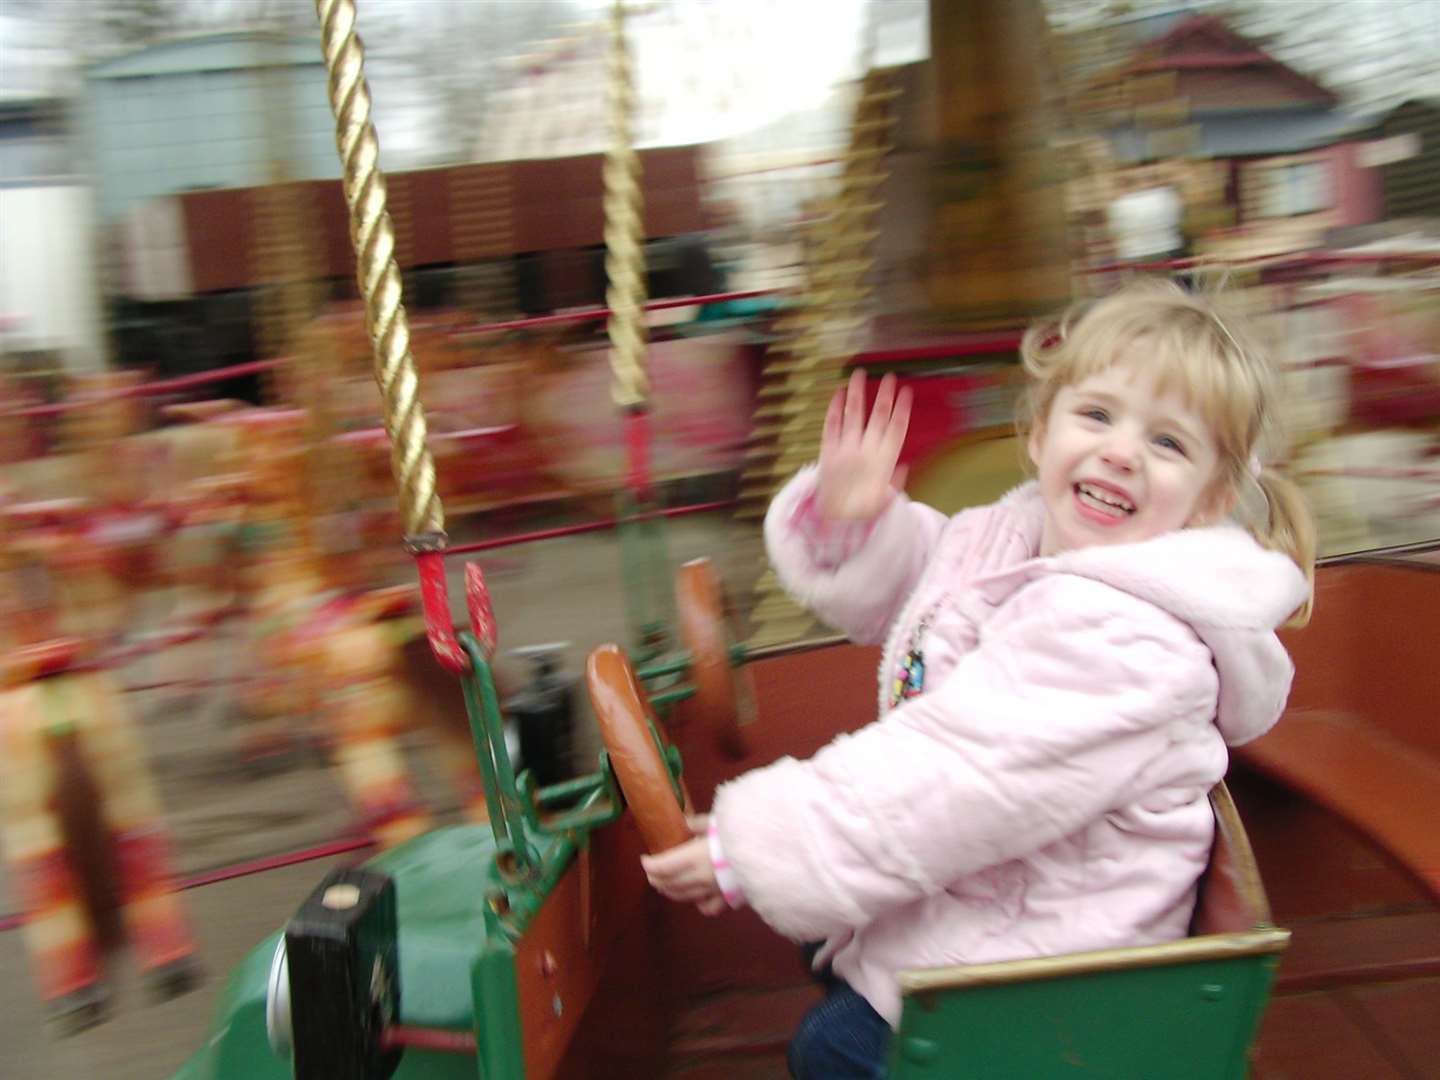 Molly has enjoyed fairground rides since she was a little girl